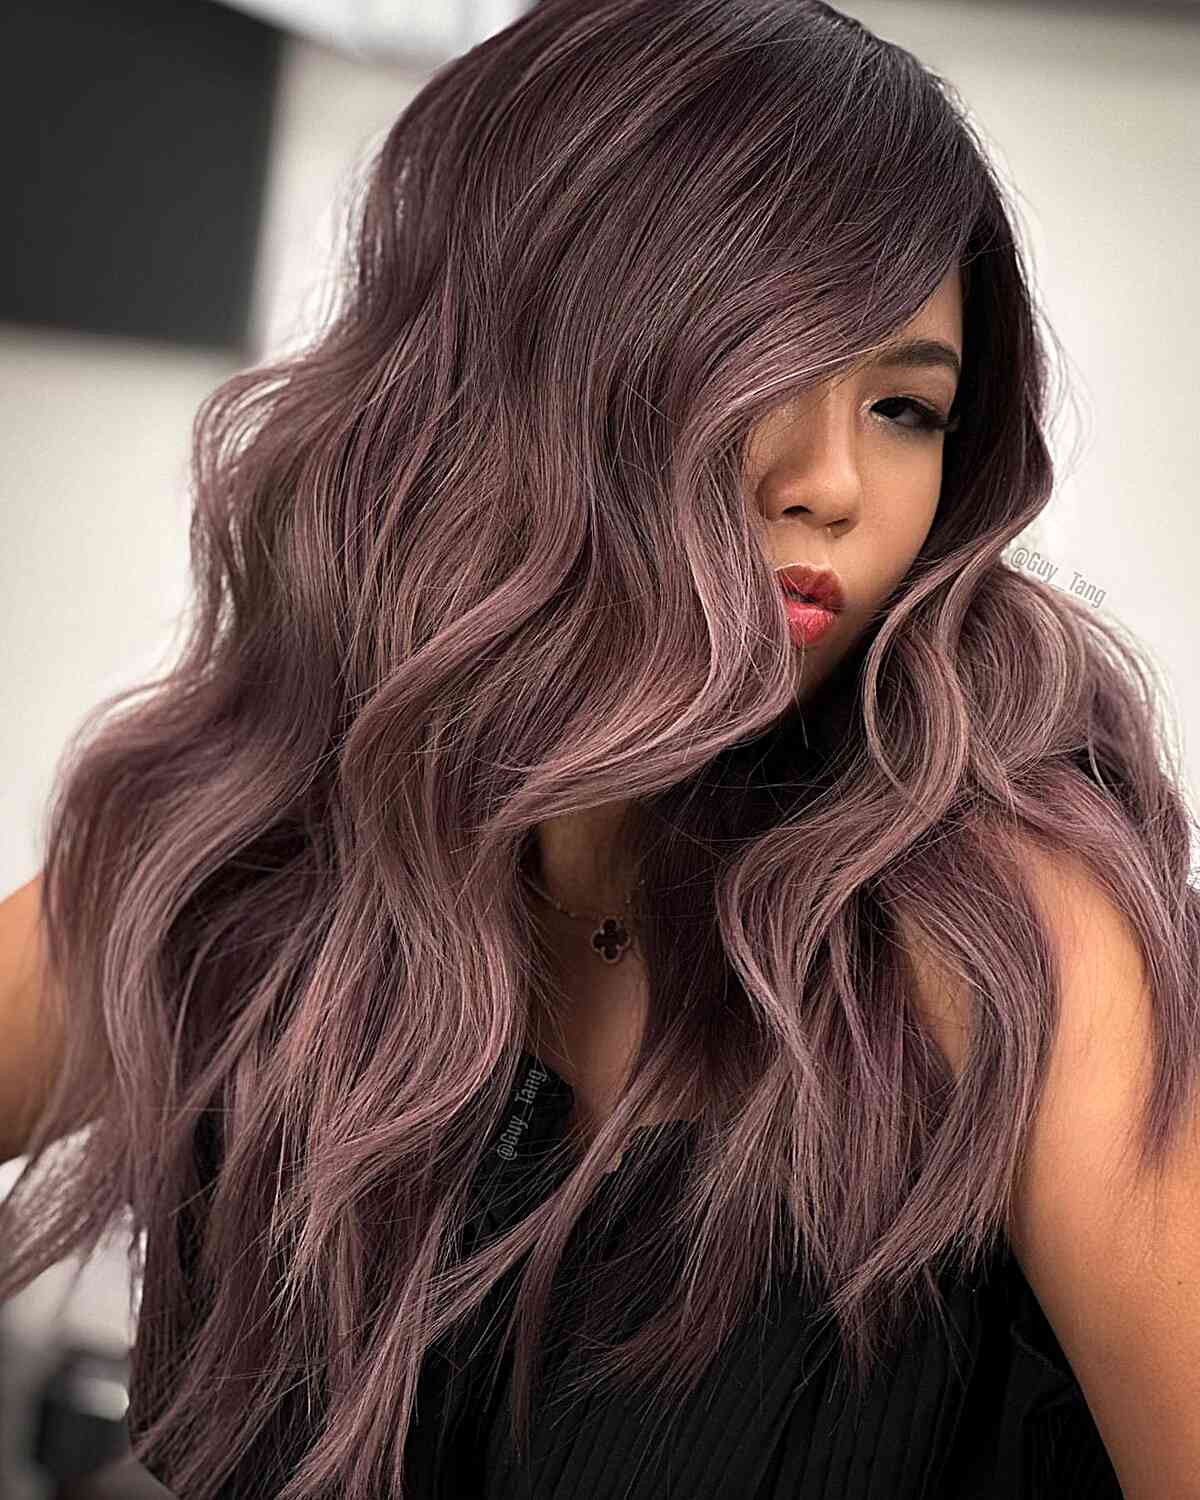 These are The 52 Hottest Hair Color Ideas of 2023